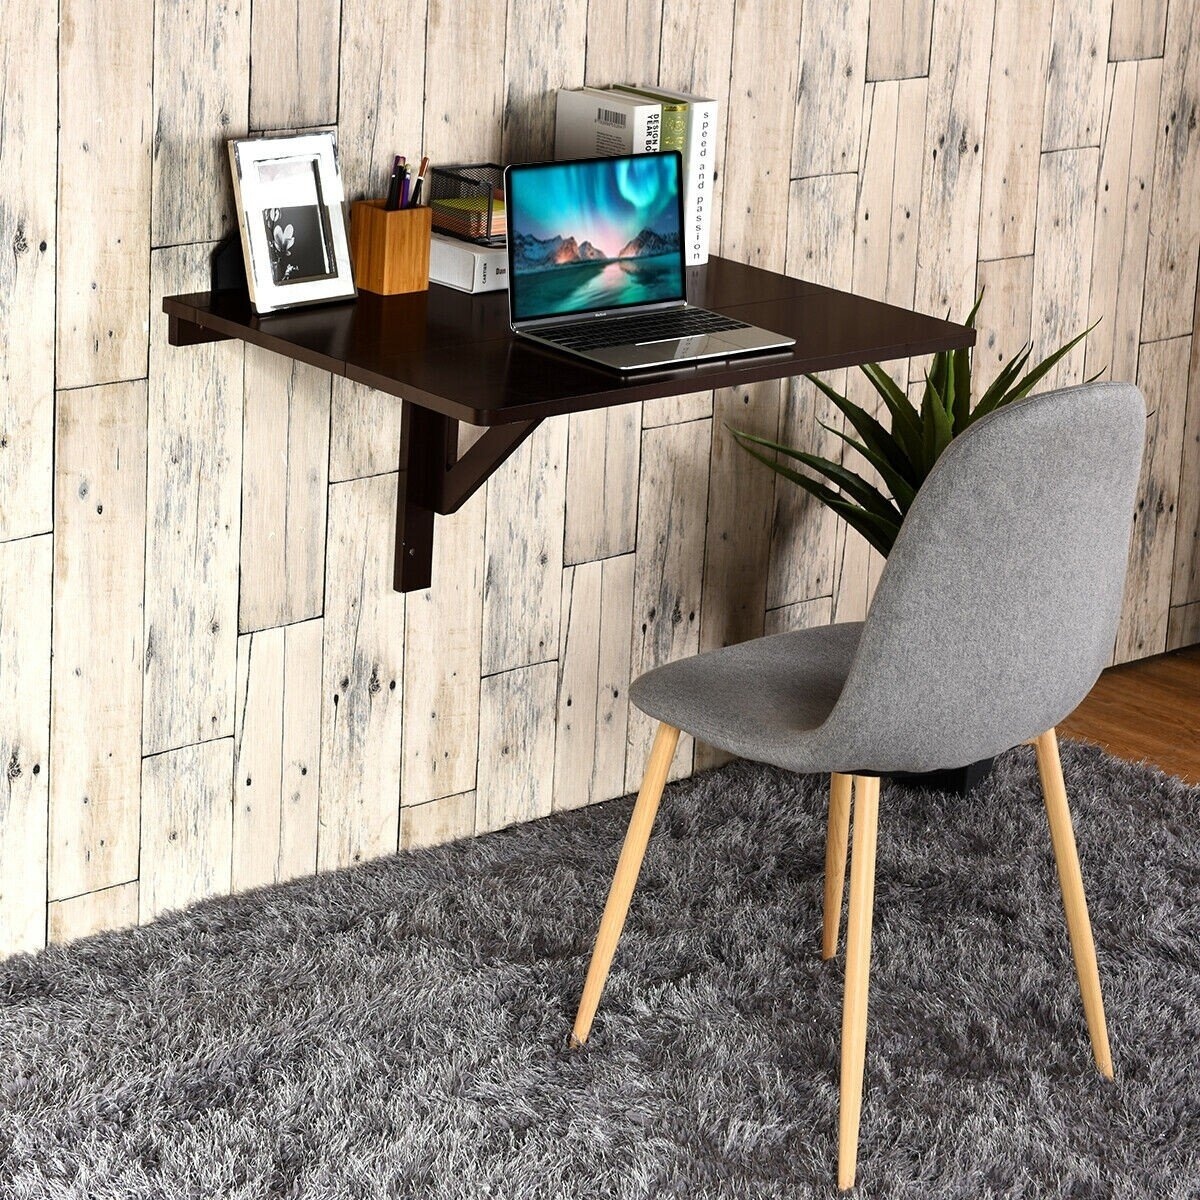 Wall Mount Computer Desk, Wall-Mounted Drop-Leaf Table,Wall Mounted Table  Folding Desk for Small Spaces, Multi-Size Optional